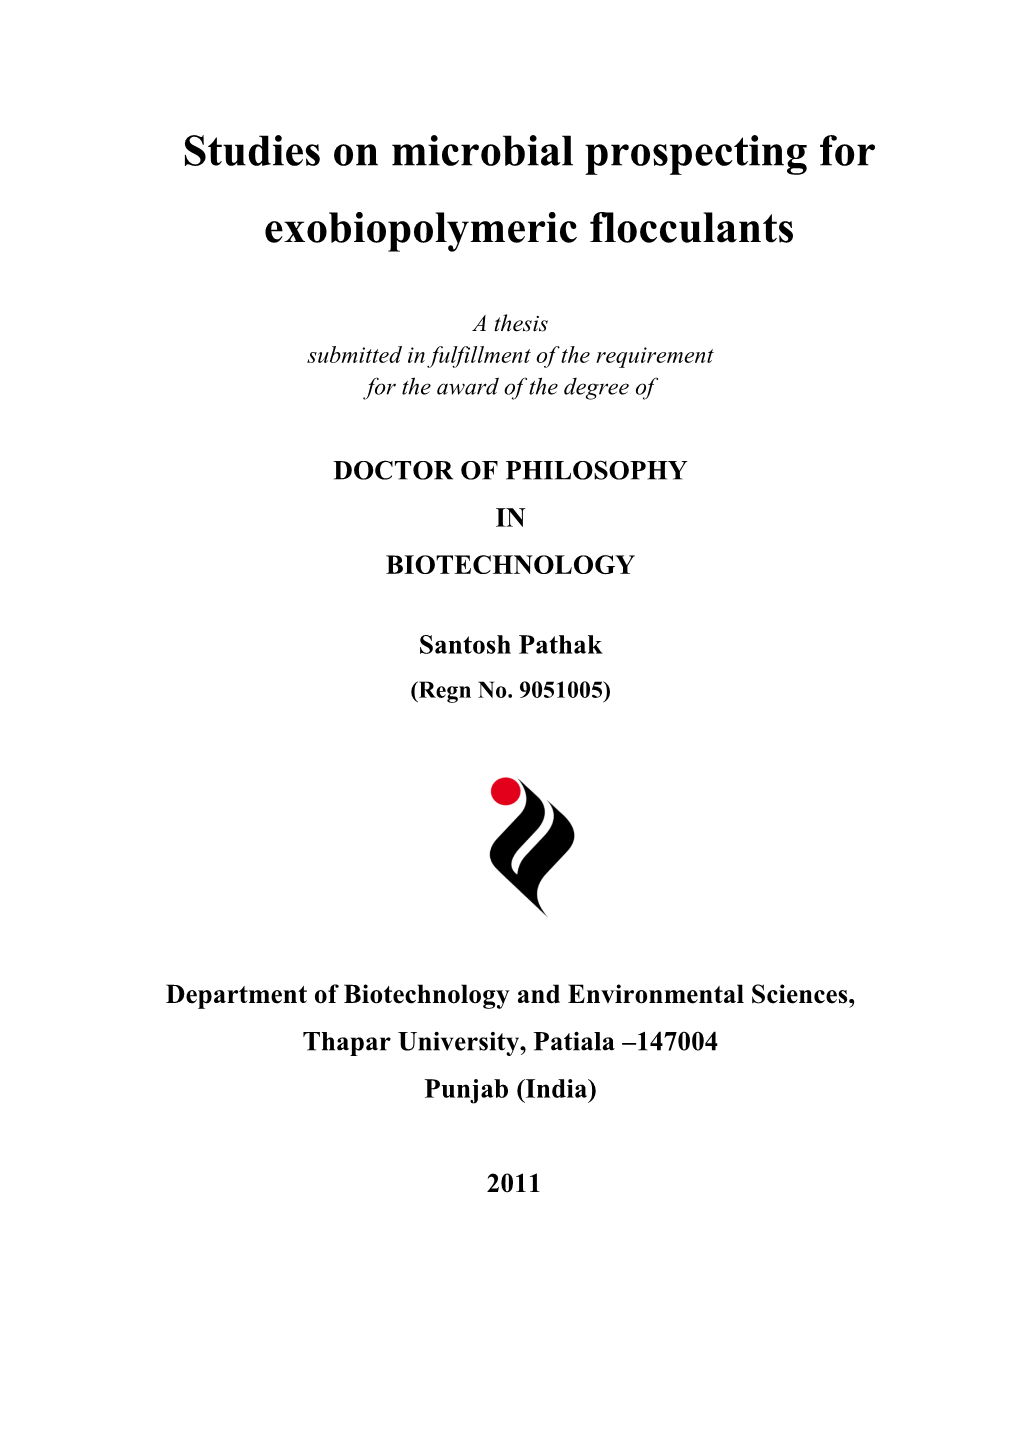 Studies on Microbial Prospecting for Exobiopolymeric Flocculants